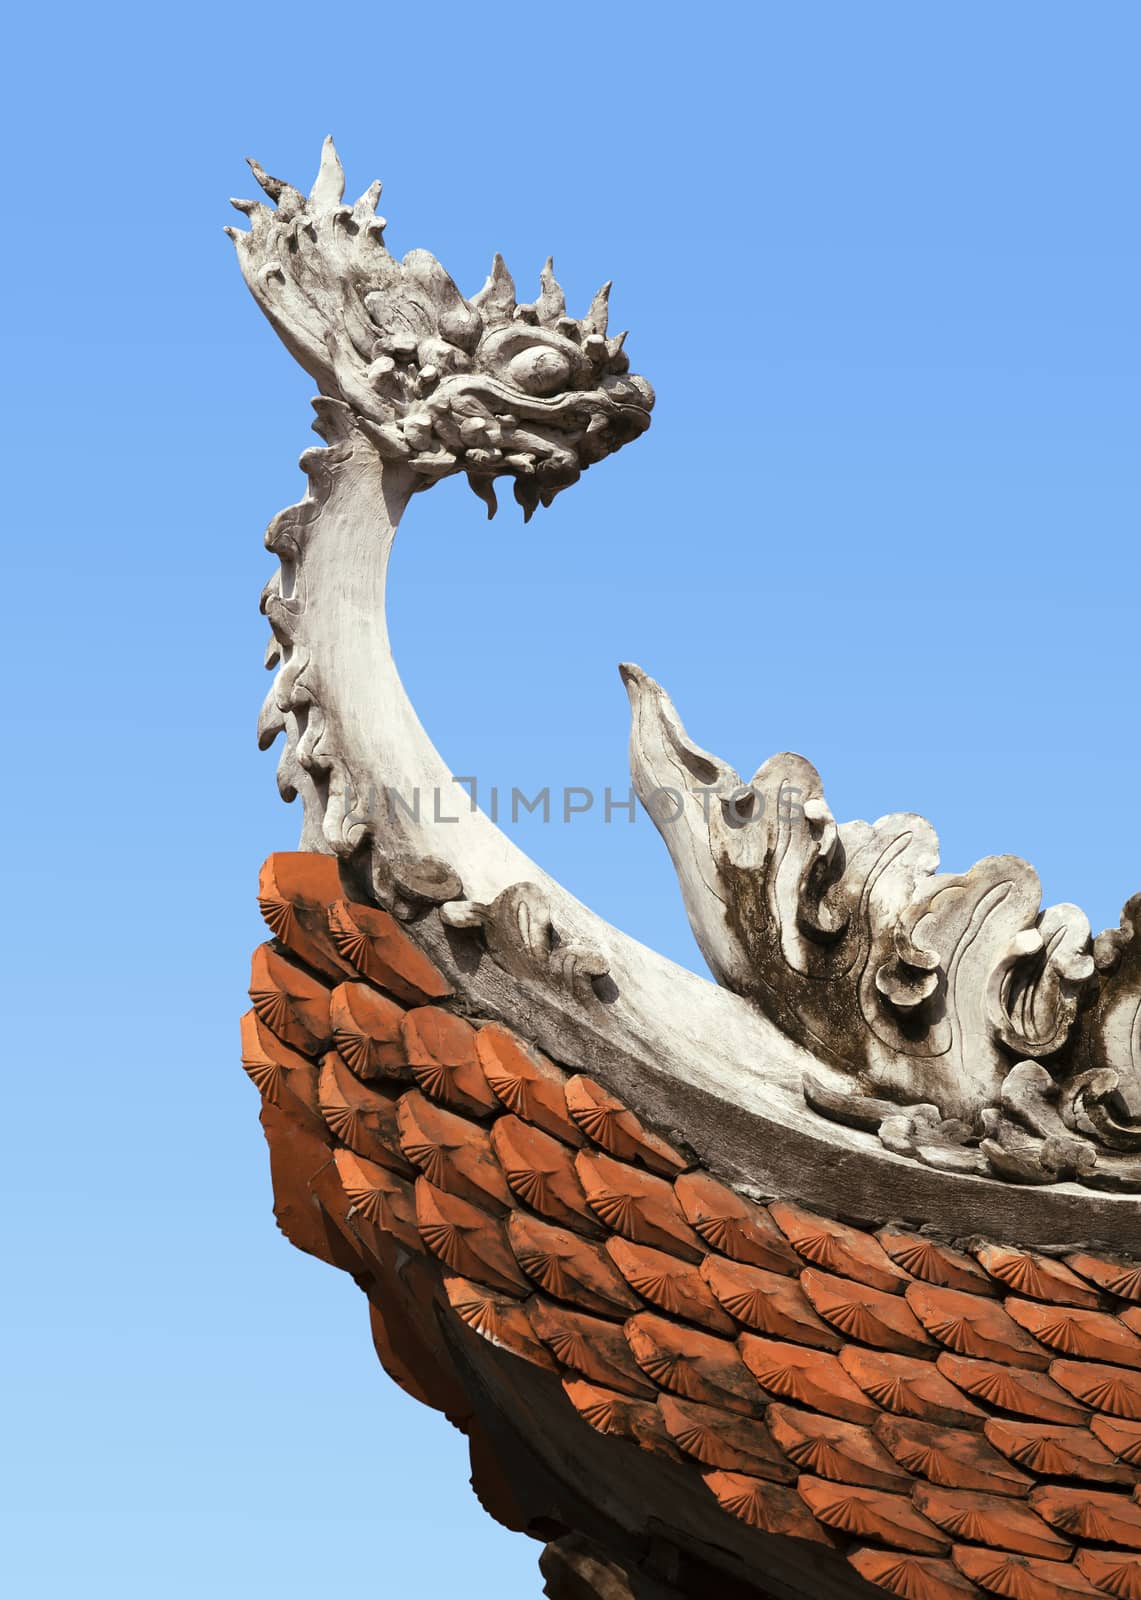 Ceramic decoration on a temple roof in Vietnam